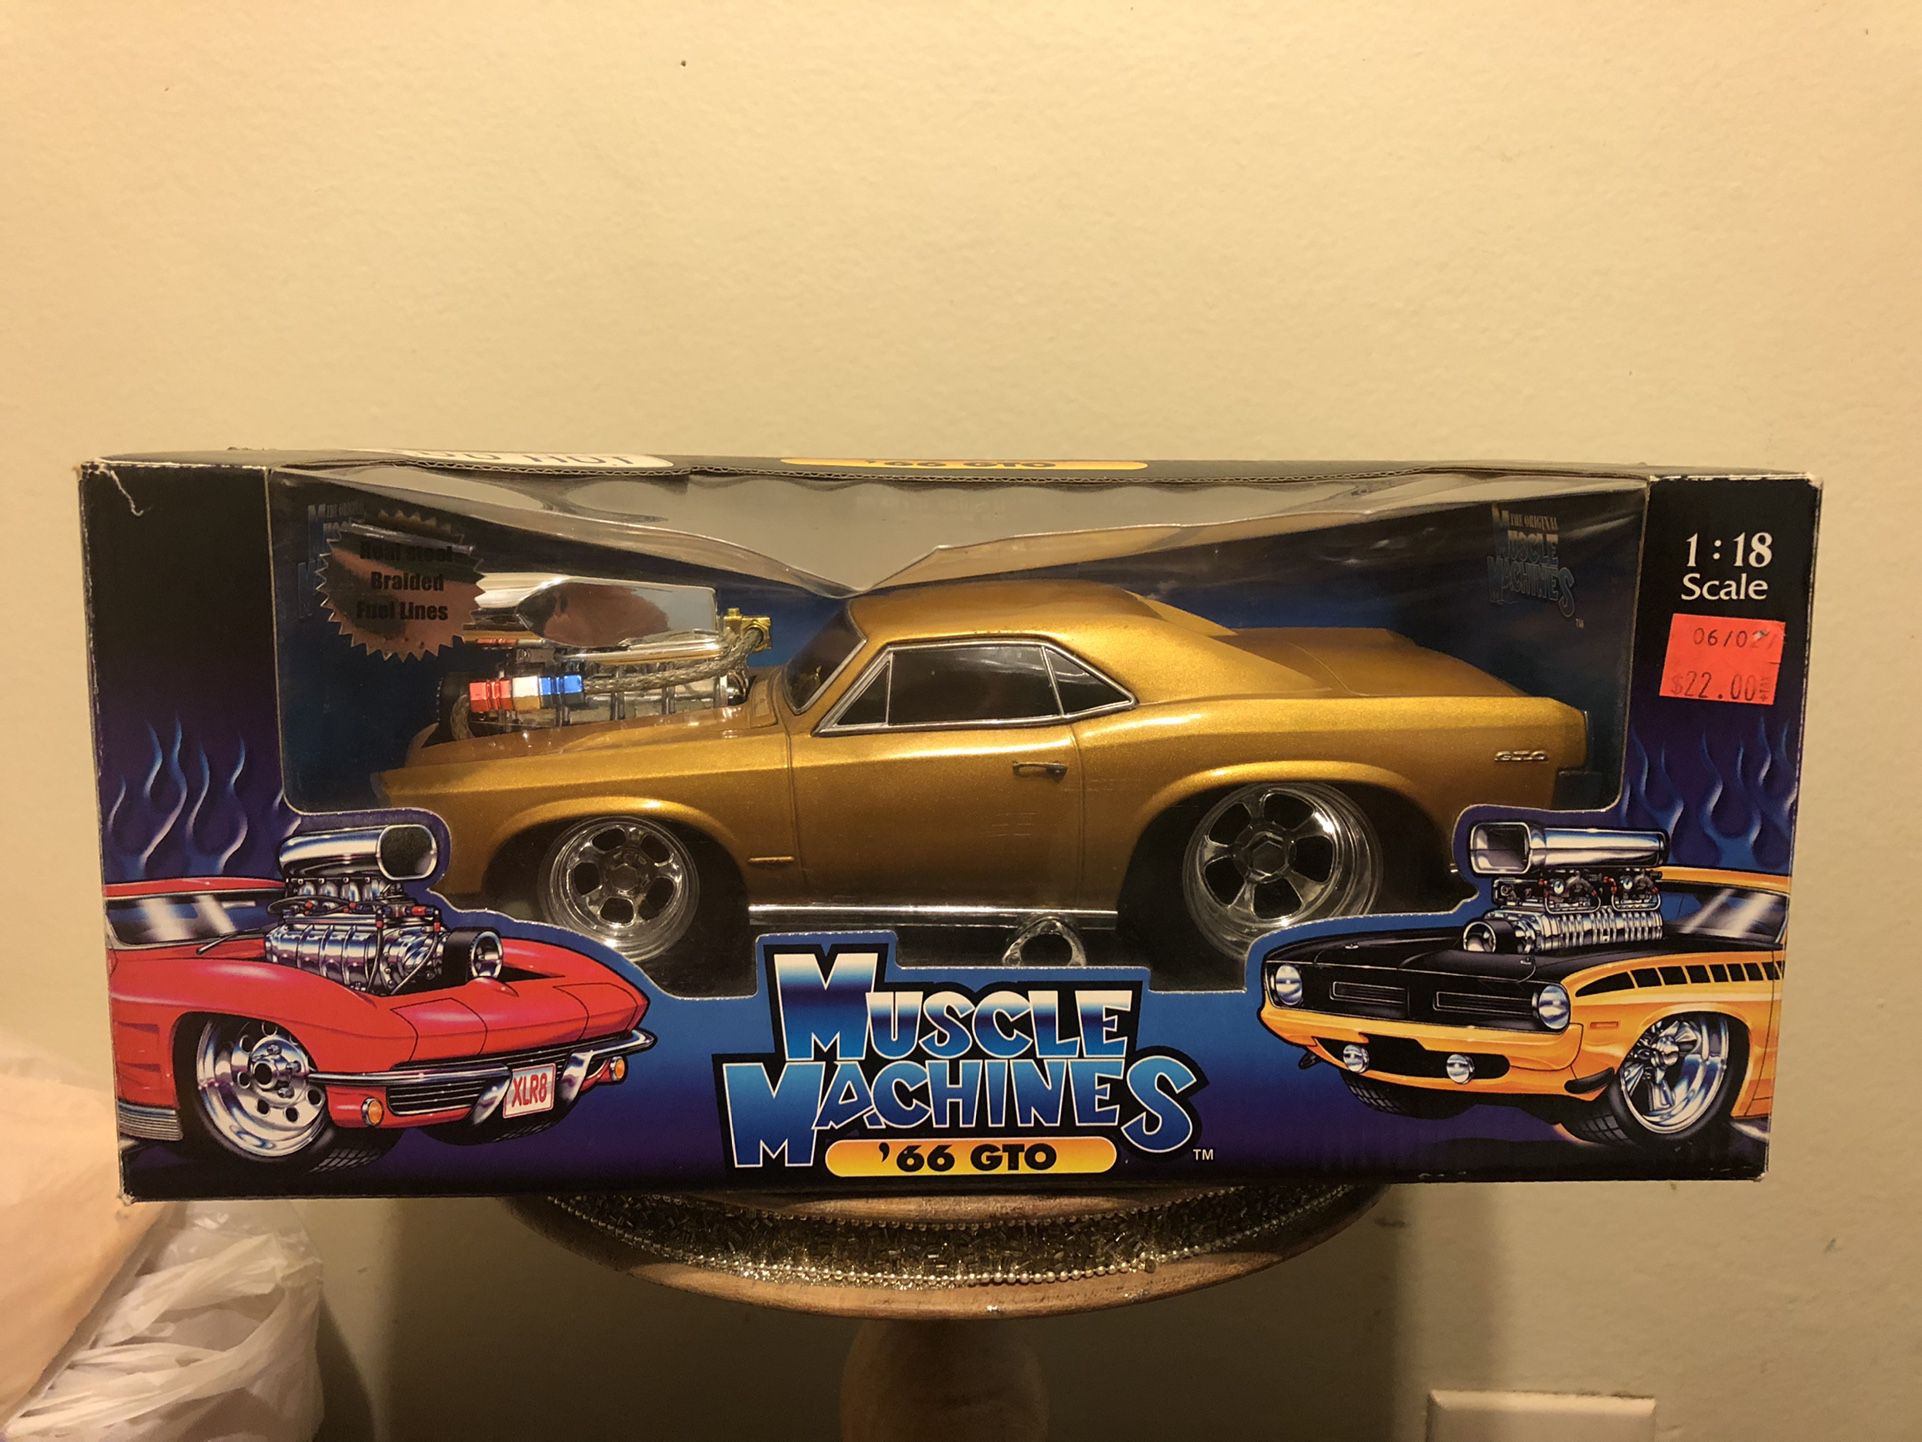 MUSCLE MACHINES 66 GTO 1:18 SCALE